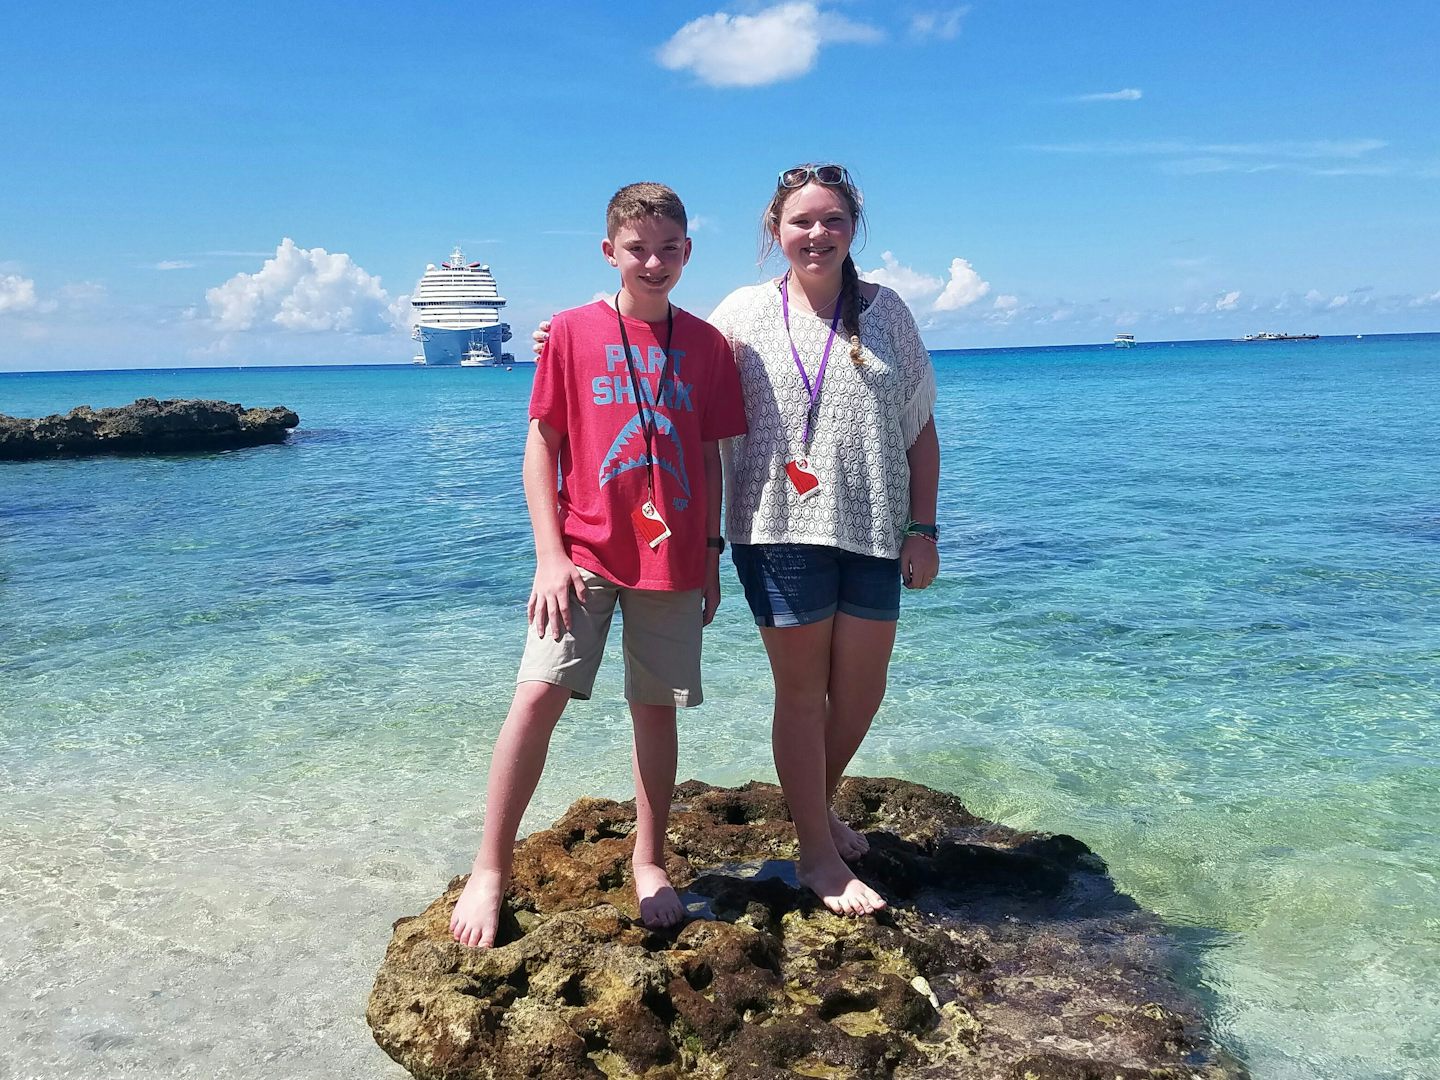 My kiddos standing on a rock formation in Grand Cayman with our ship,  The Carnival Breeze in the background.